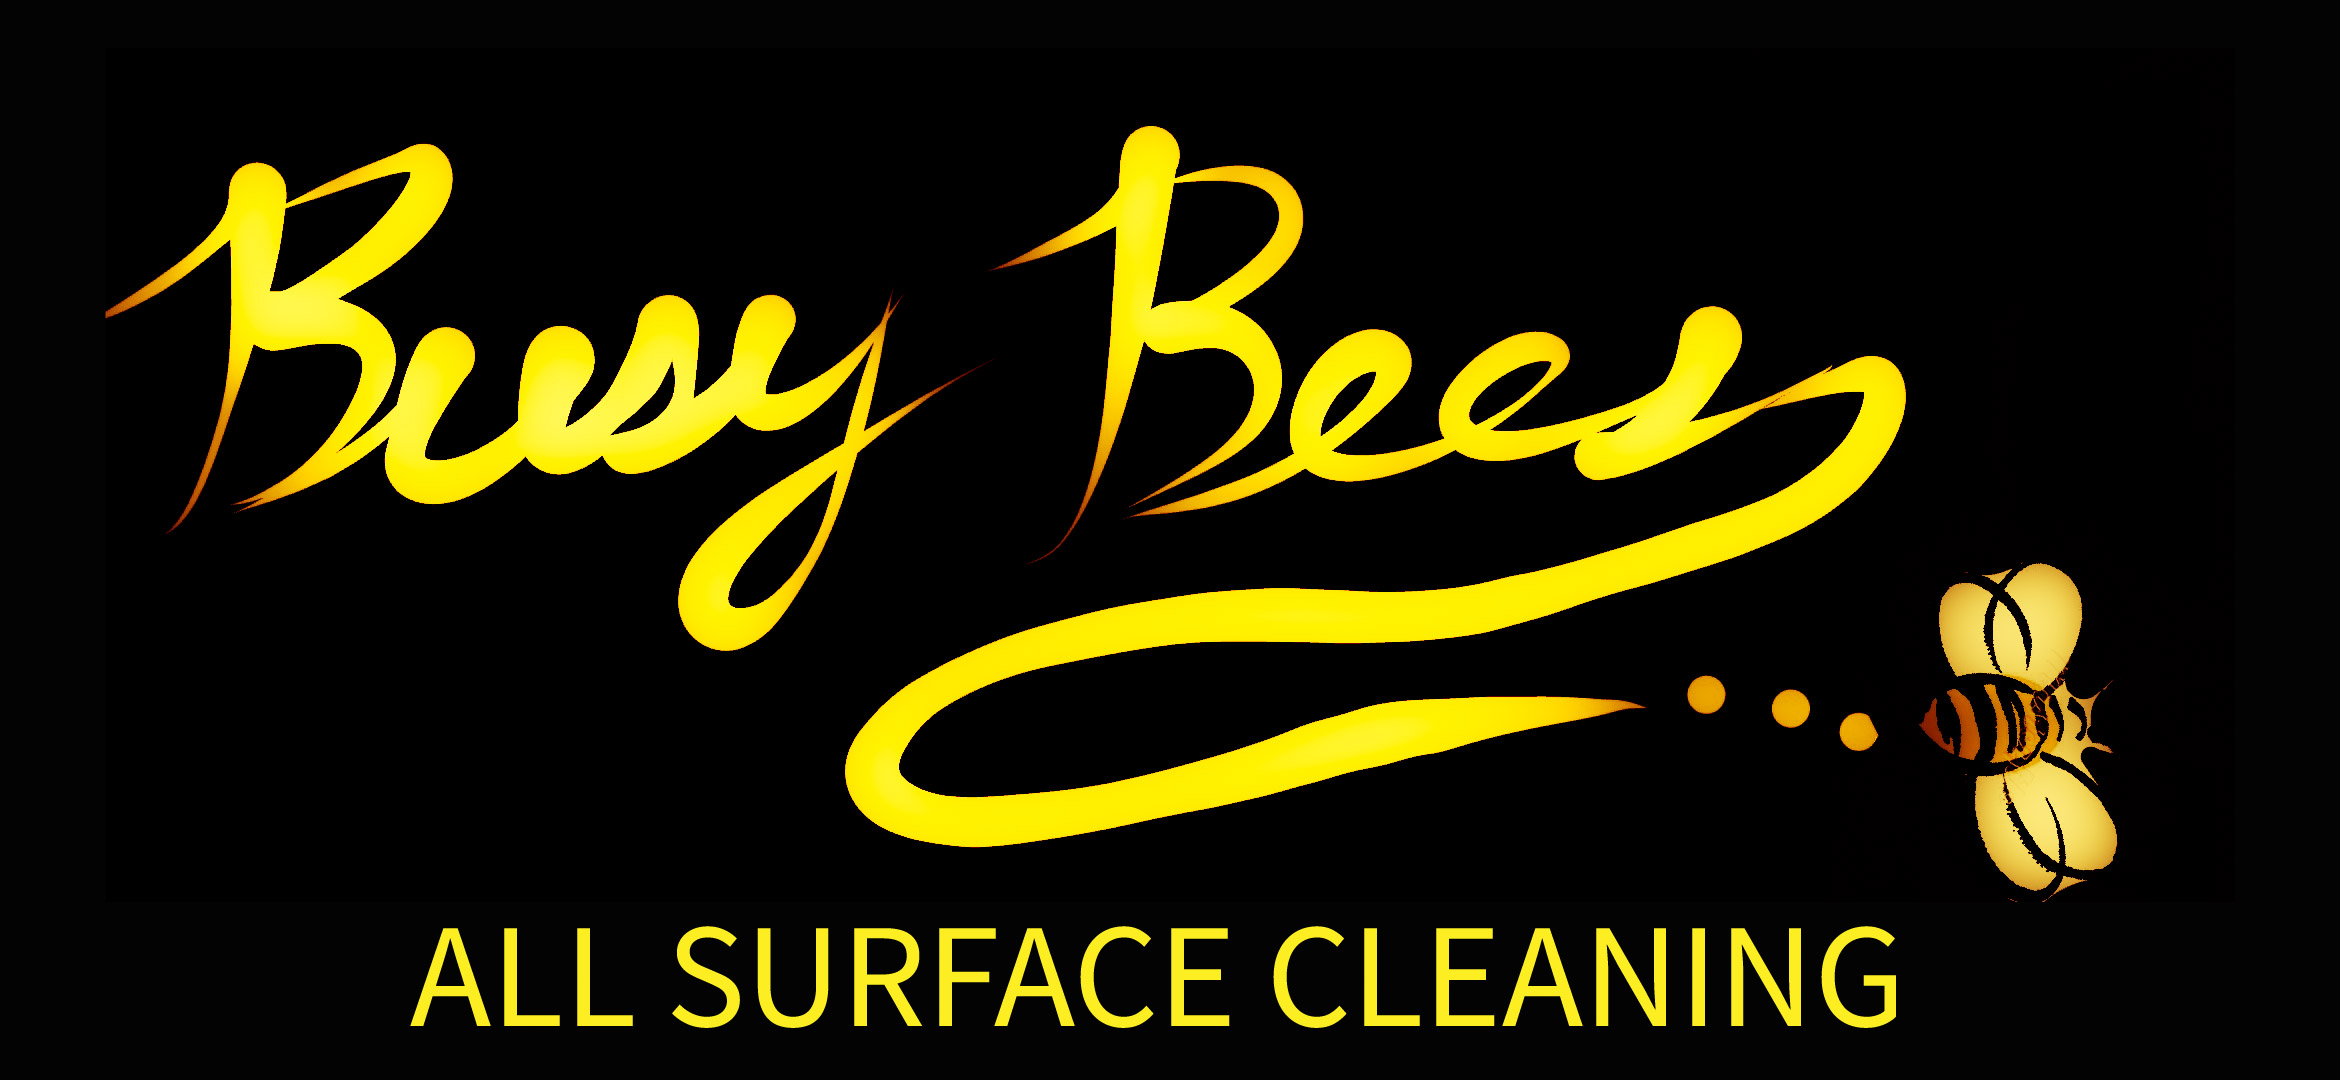 Busy Bees All Surface Cleaning Logo